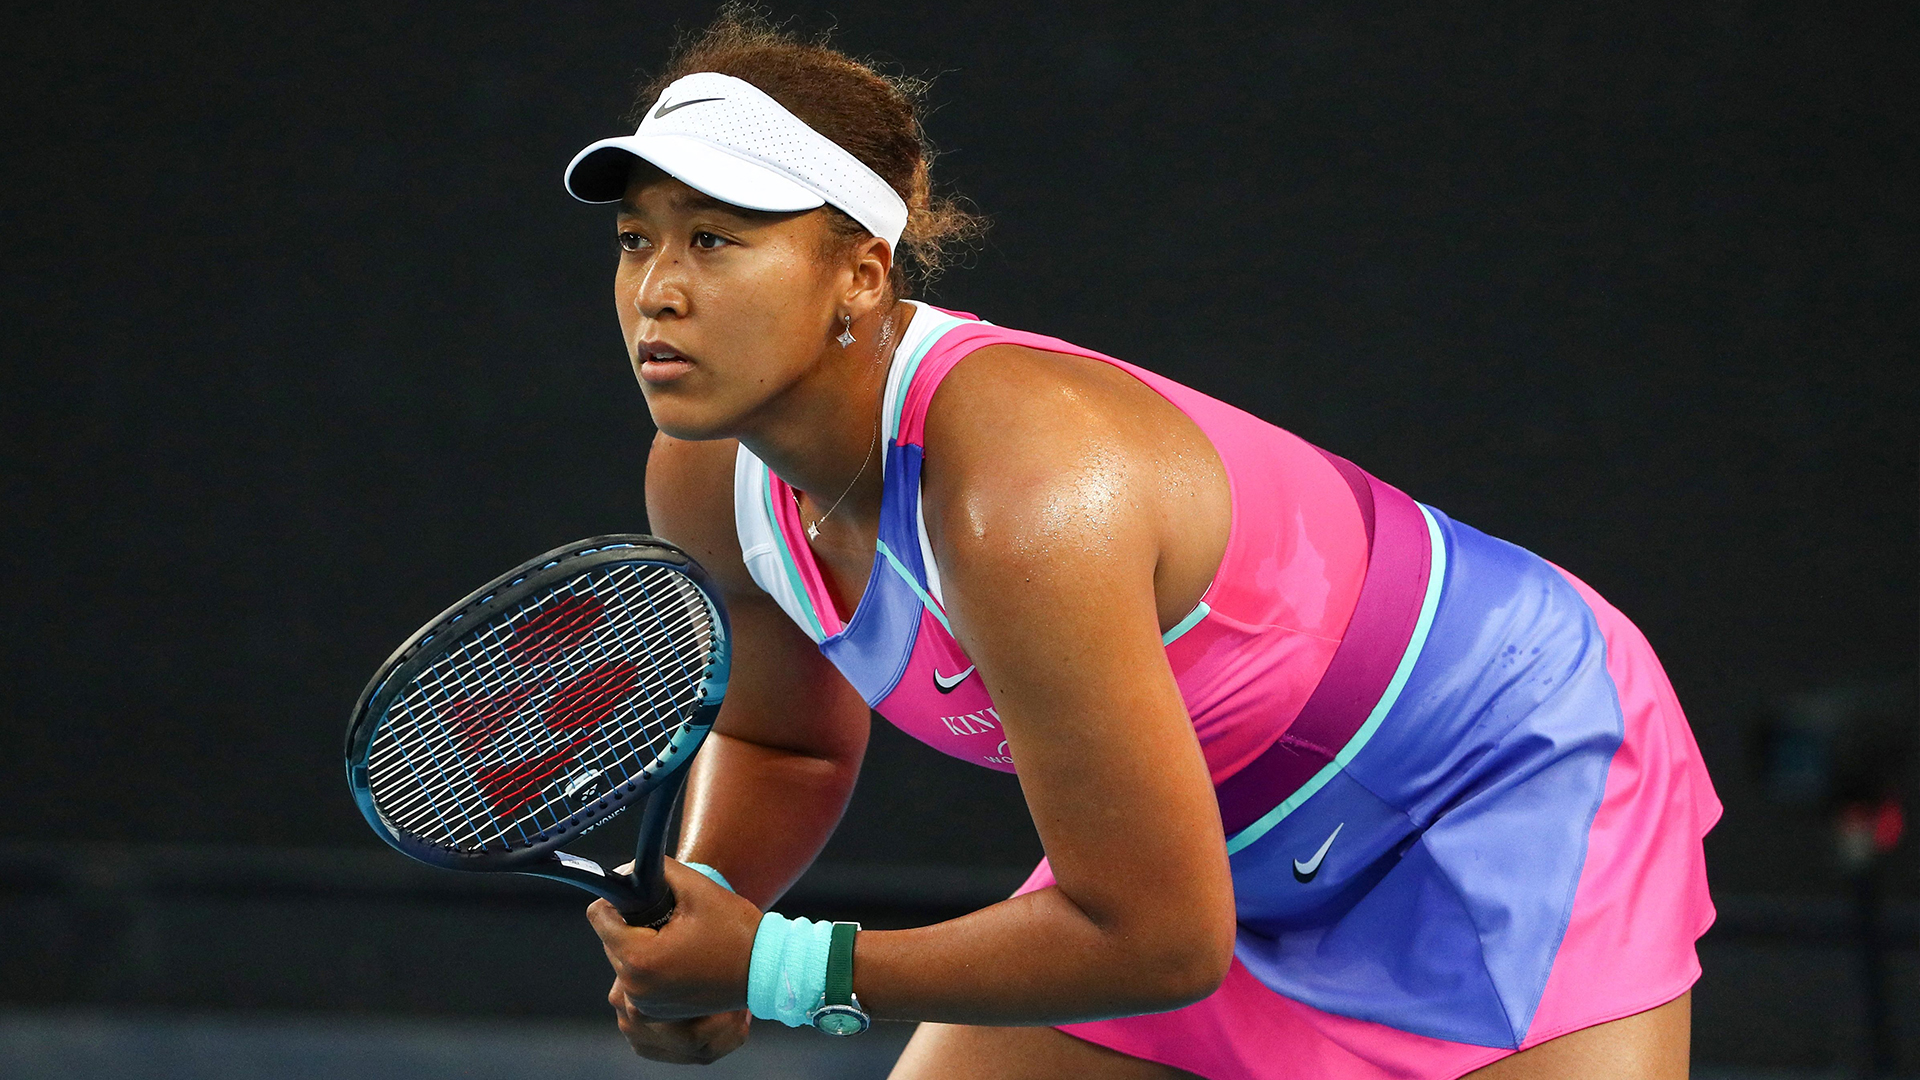 Naomi Osaka Joins Crypto Firm FTX As An Ambassador As She Aims To Bring More Women Into Web3